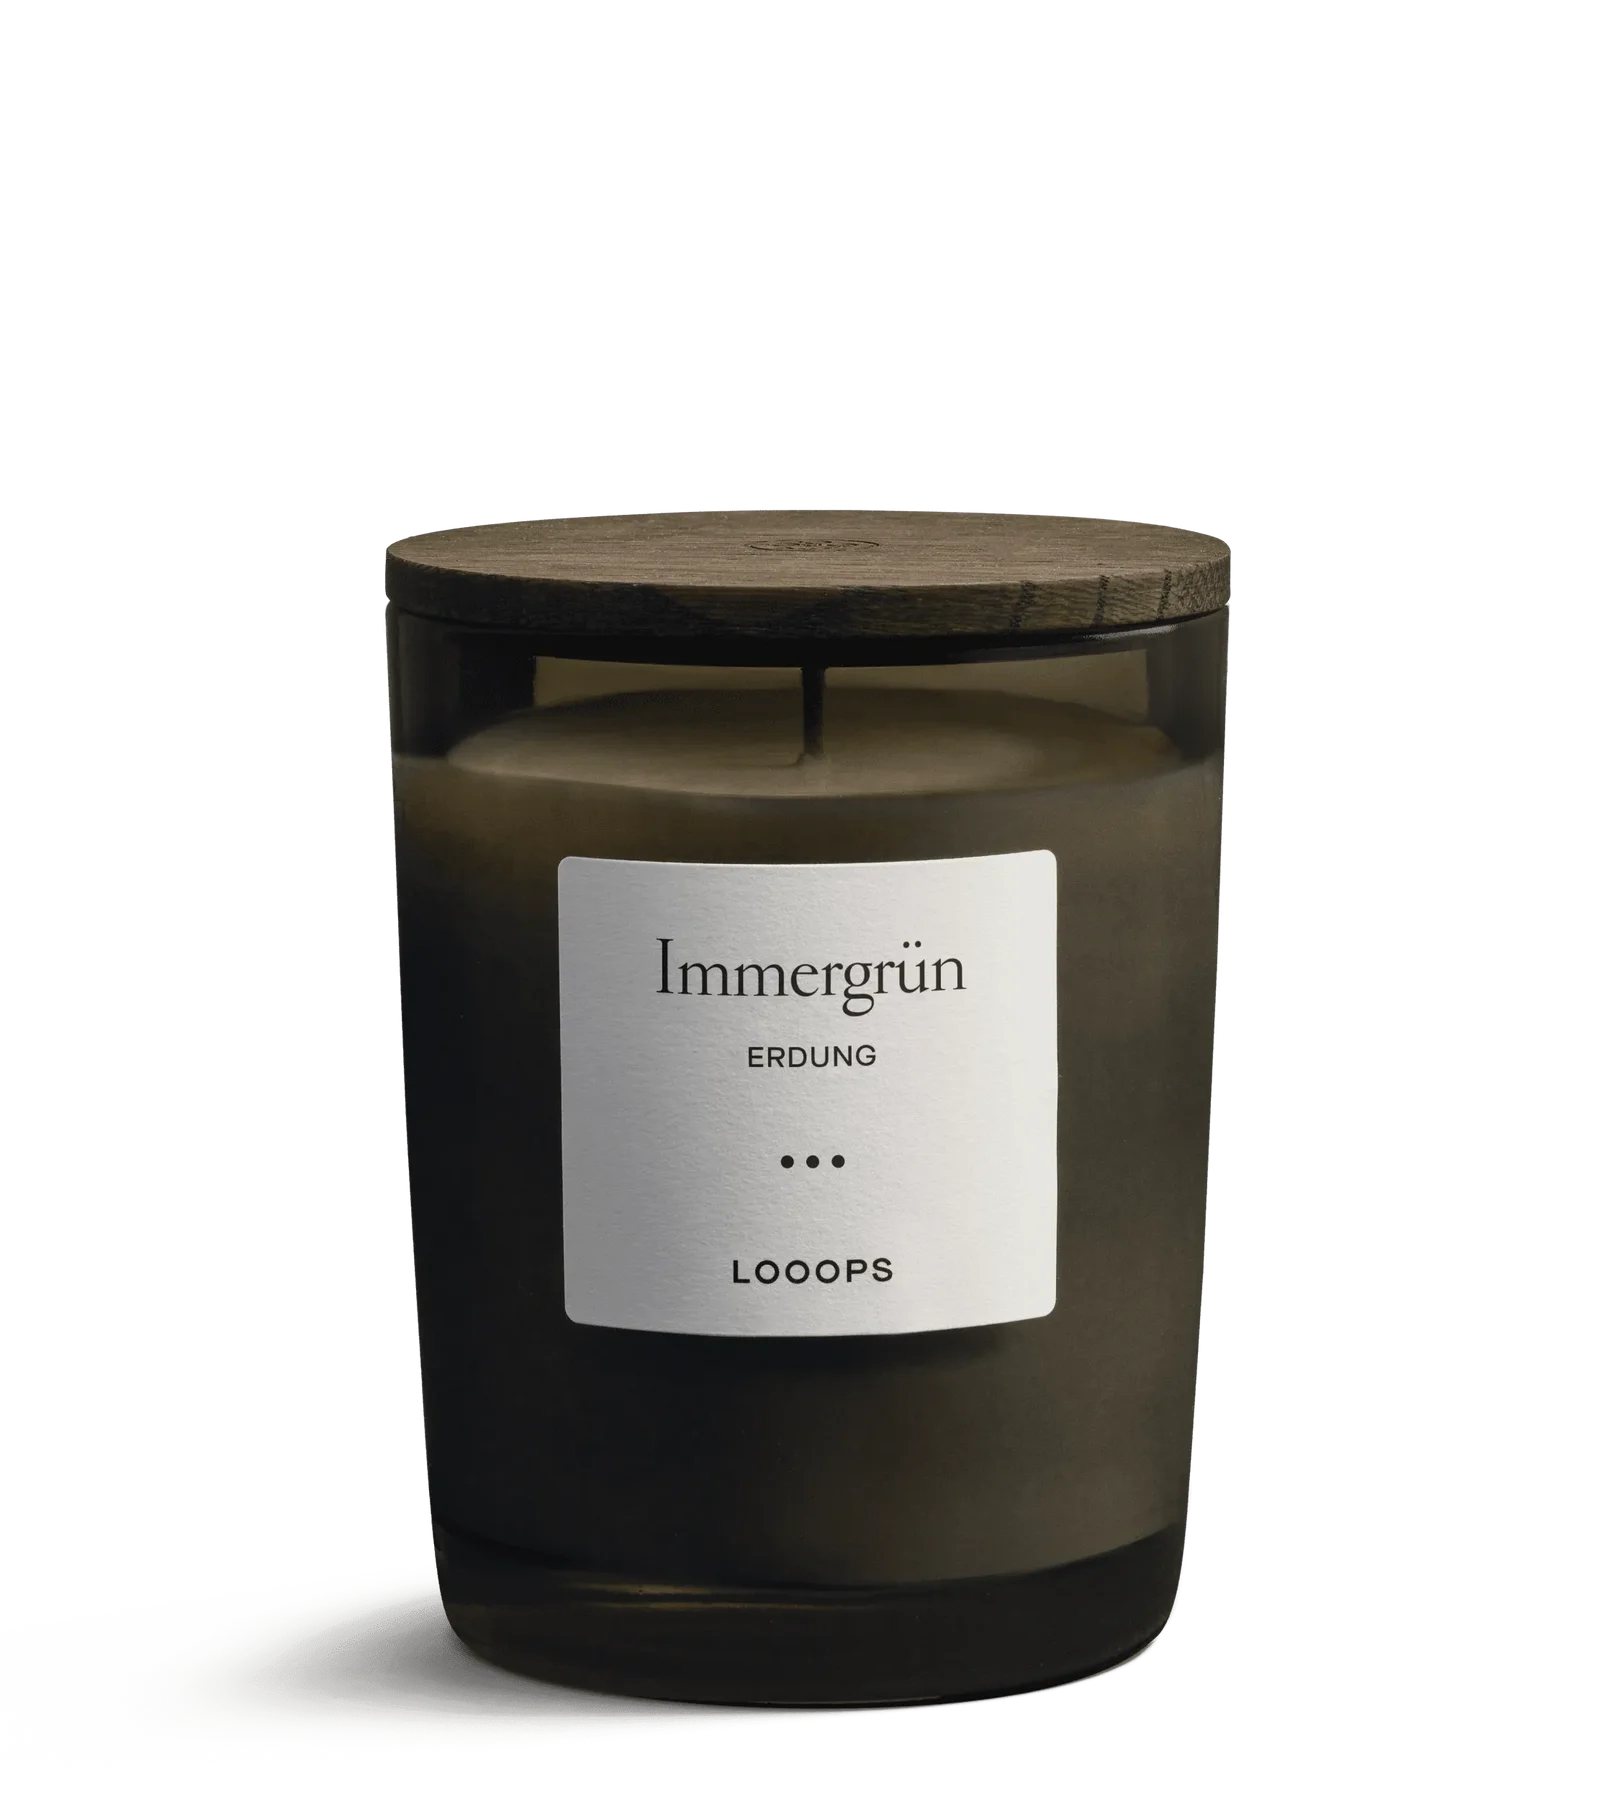 Immergrün scented candle 250 g